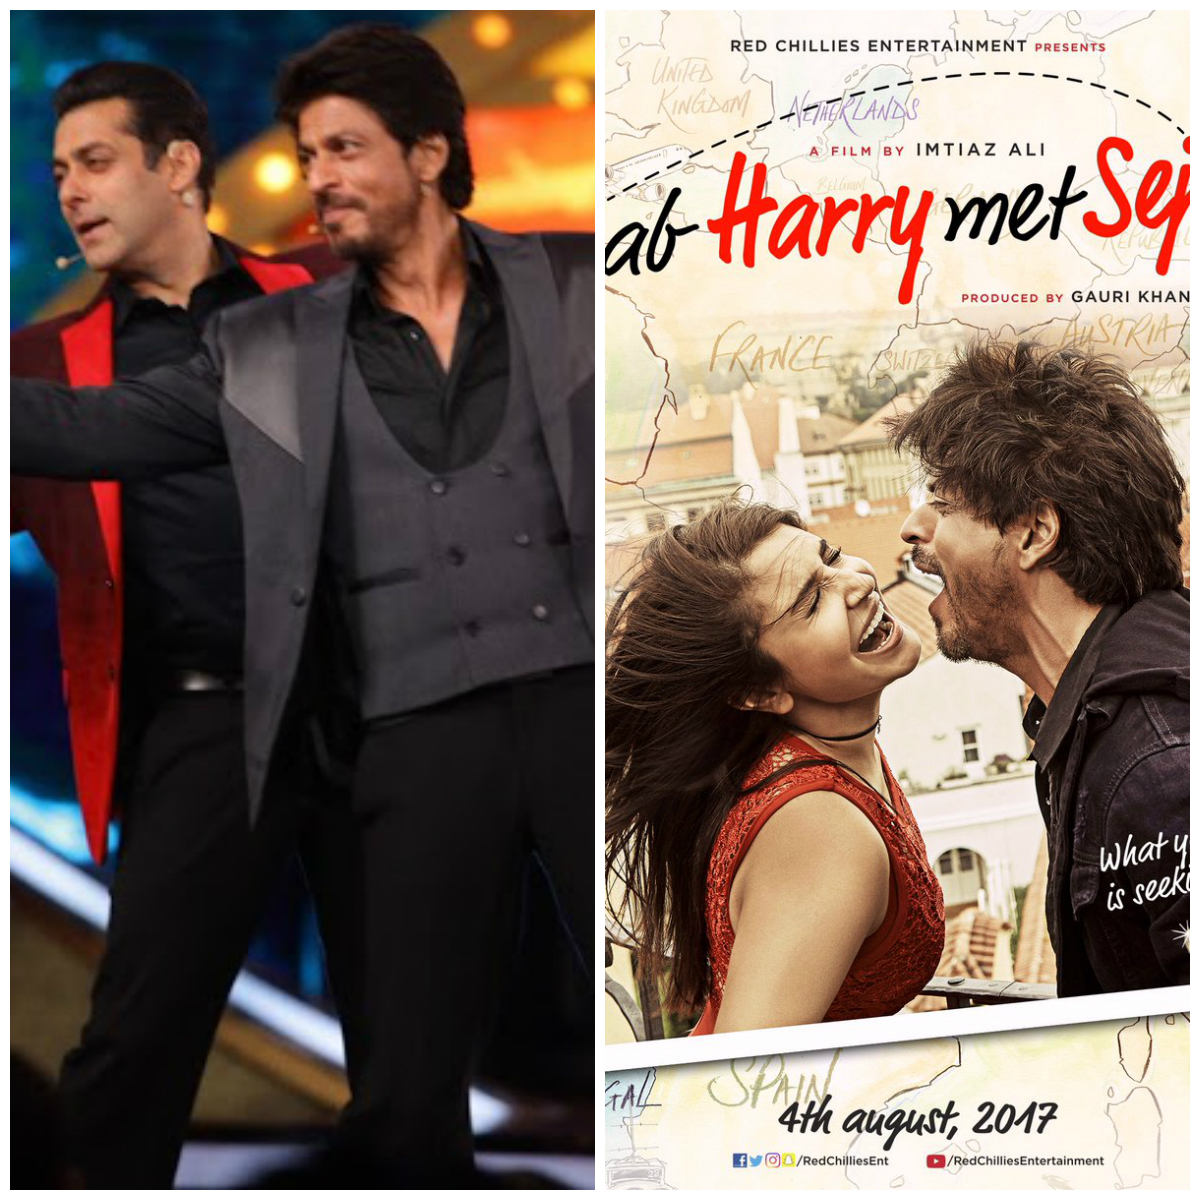 EXCLUSIVE: Salman Khan - Shah Rukh Khan's Jab Harry Met Sejal is a more appropriate title than Tubelight